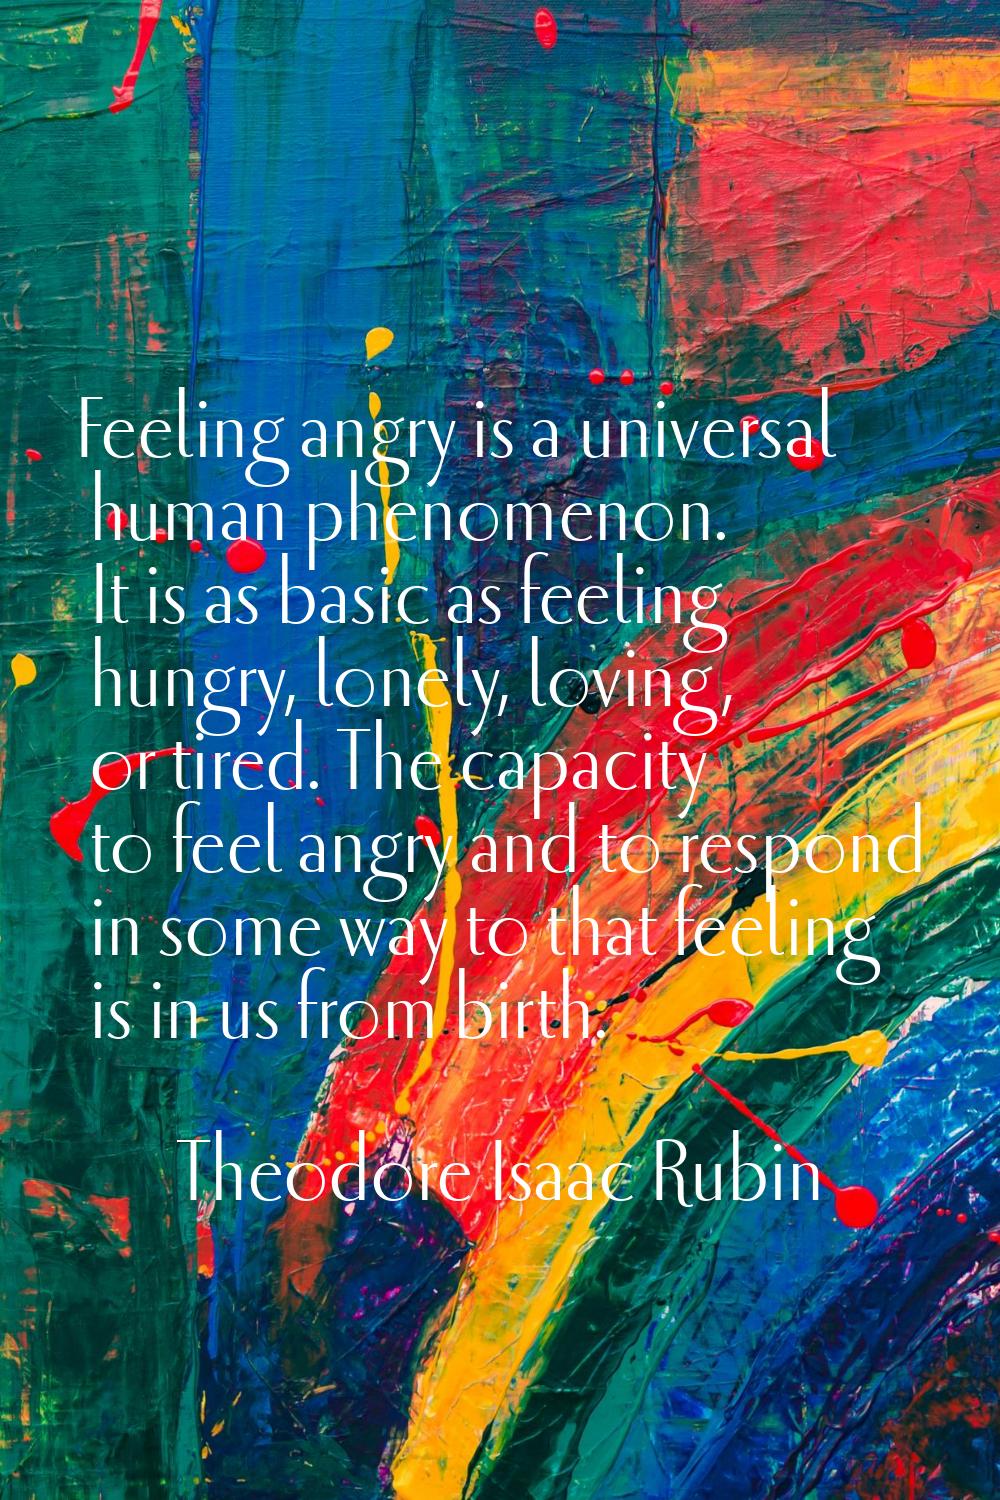 Feeling angry is a universal human phenomenon. It is as basic as feeling hungry, lonely, loving, or